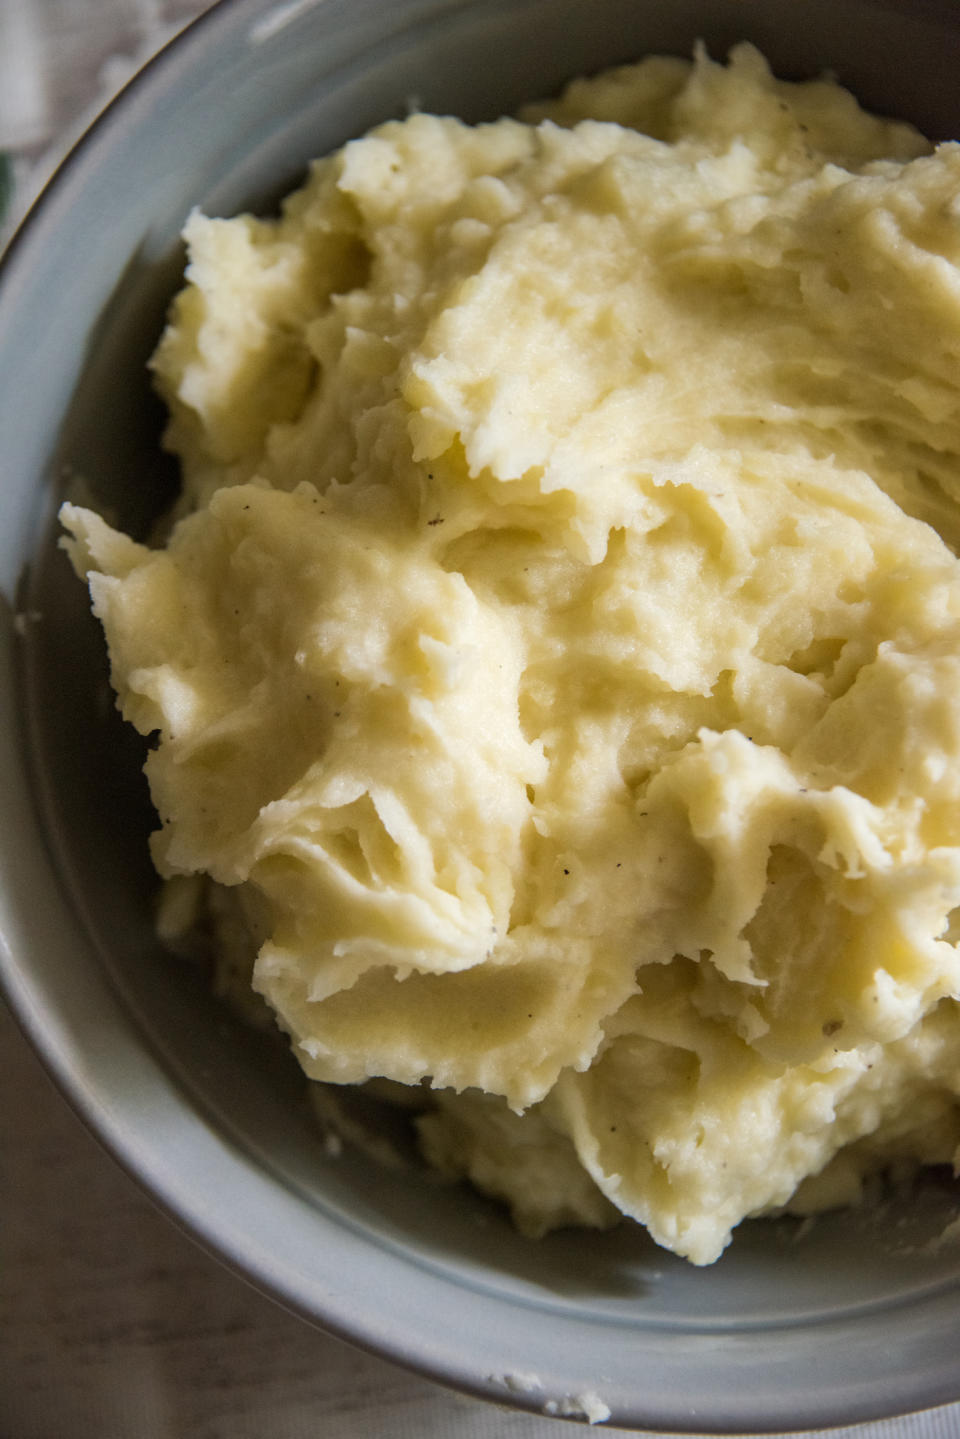 A bowl of creamy mashed potatoes with a smooth texture, served in a bowl